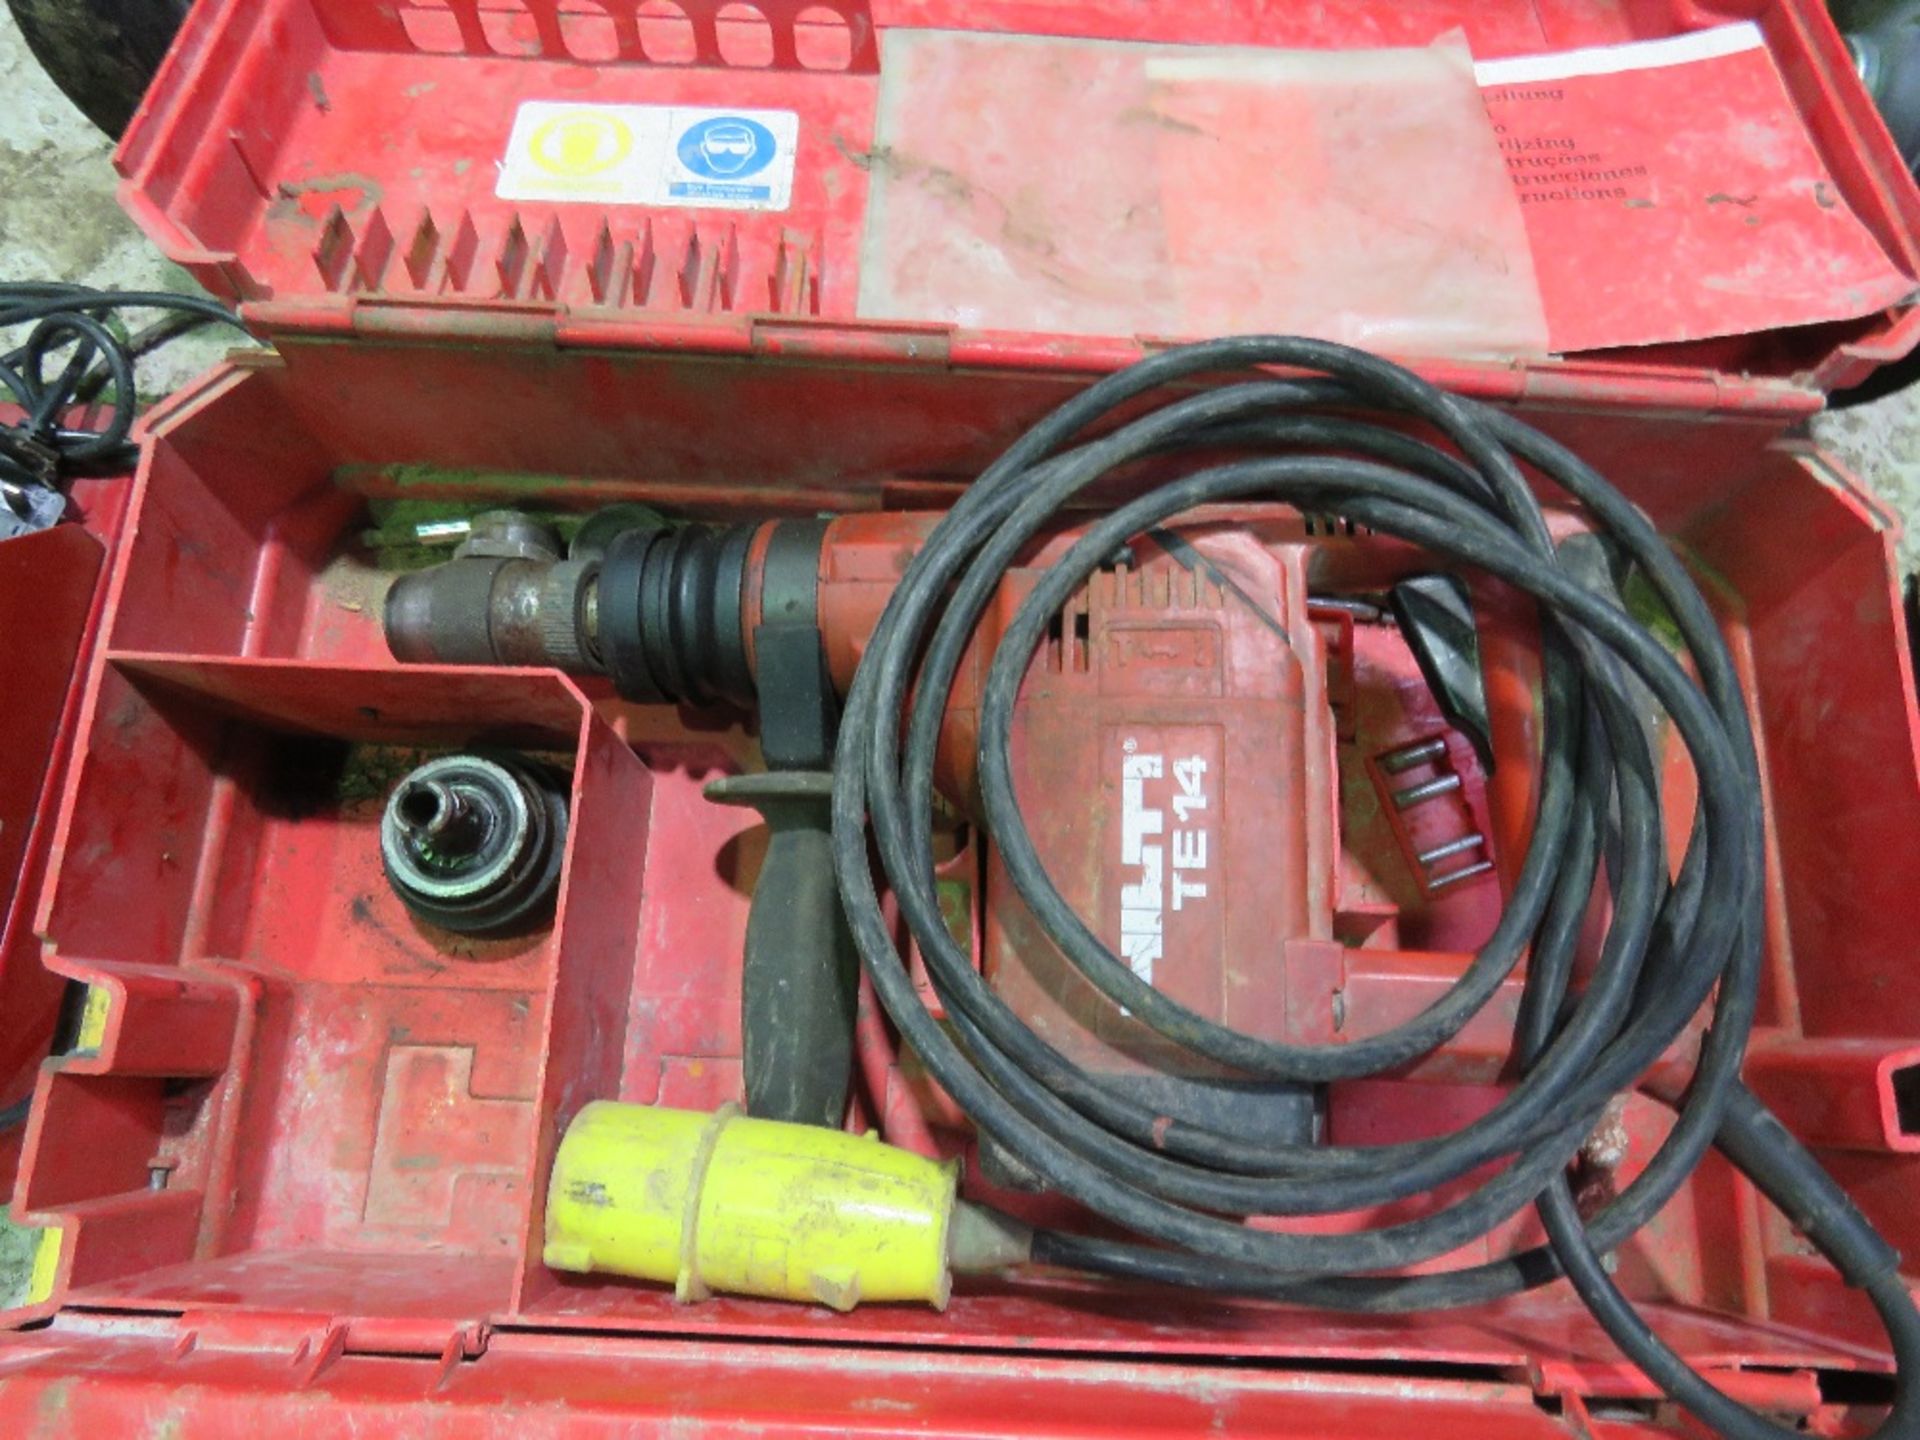 2 X BREAKER DRILLS IN CASES. SOURCED FROM GARAGE COMPANY LIQUIDATION. - Image 4 of 6